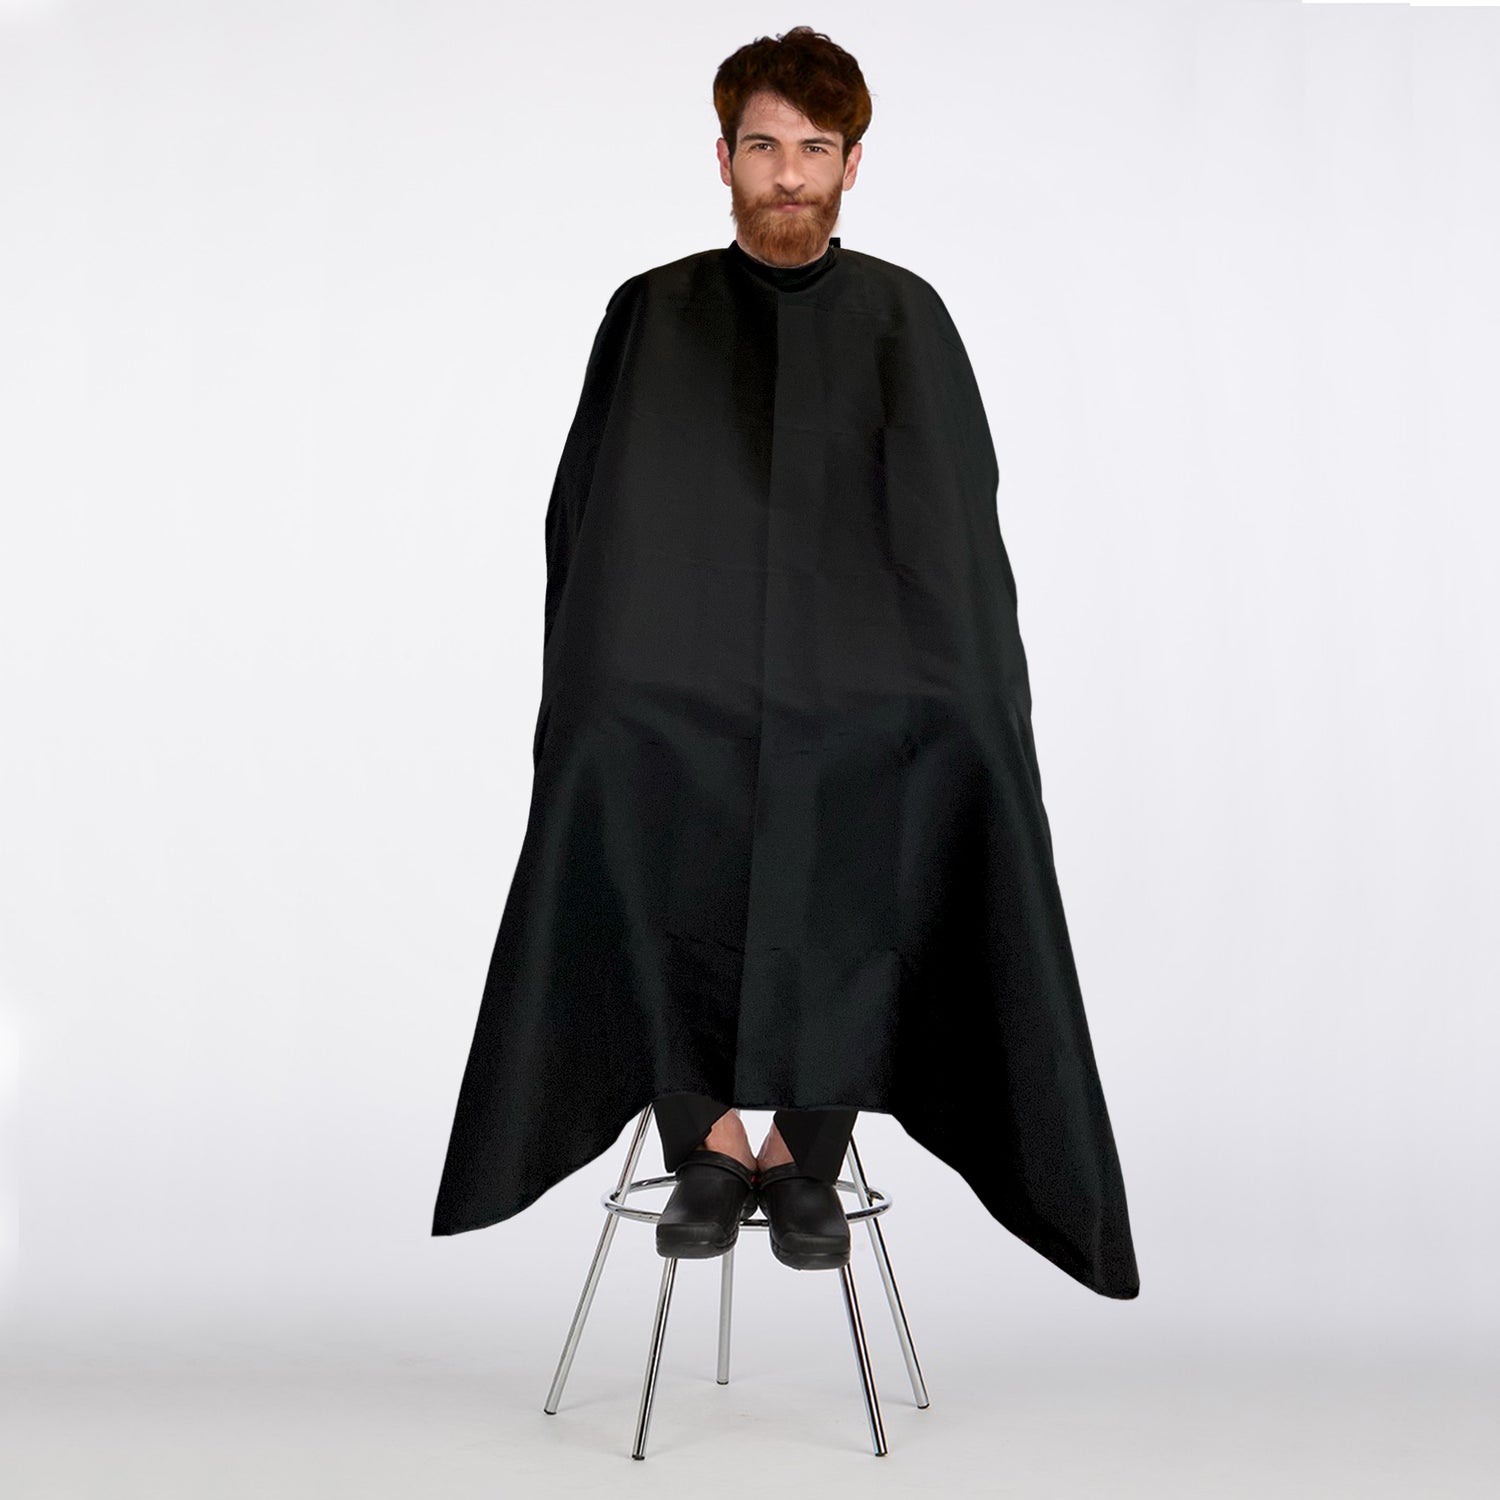 Barber Cape, Very good quality, One size fits all, nice colorful